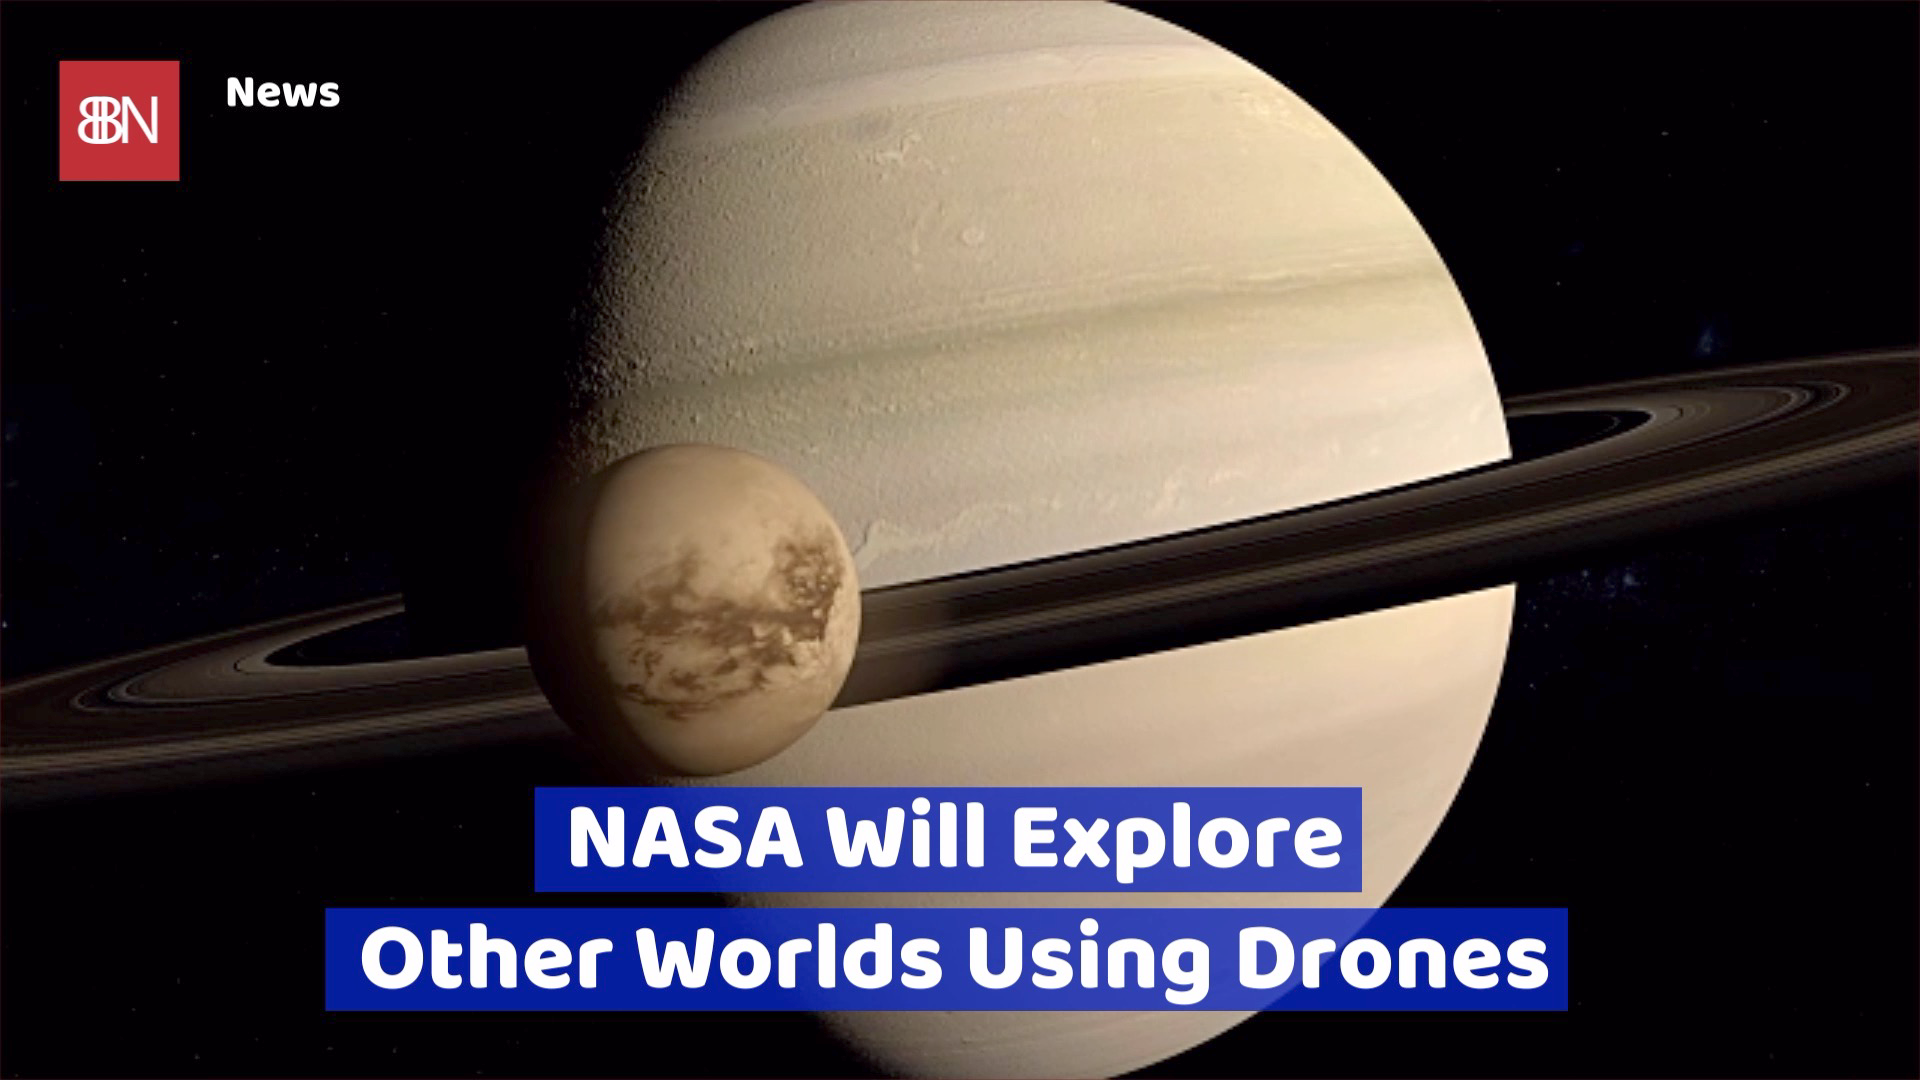 NASA’s Work With Drone Technology